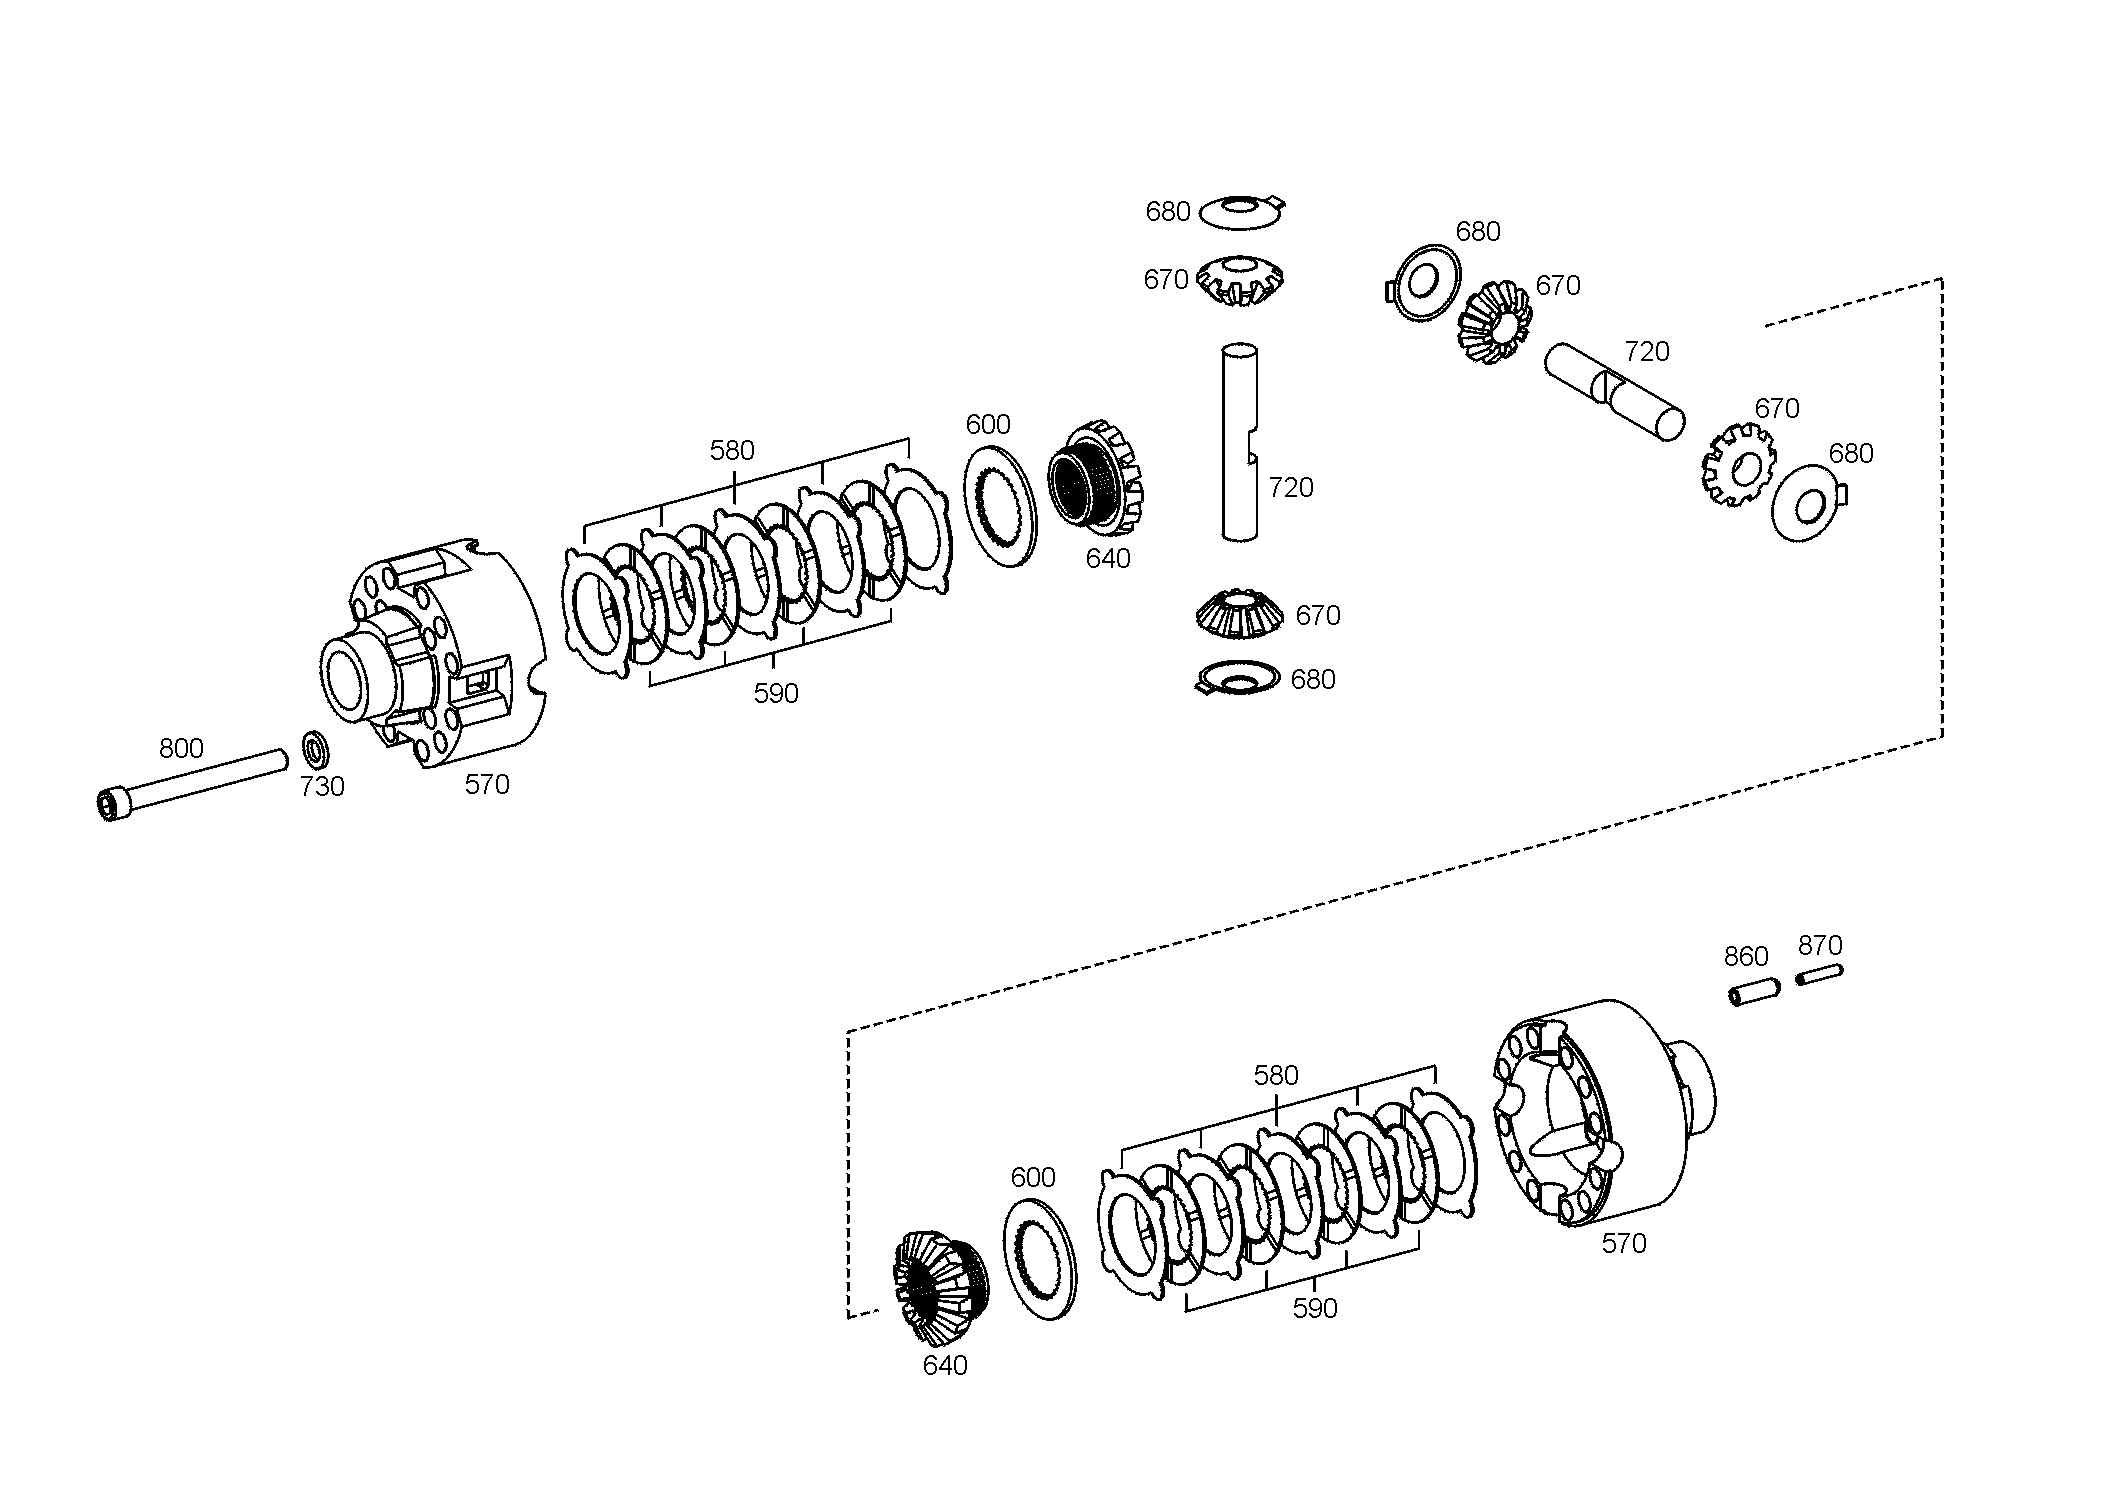 drawing for CATERPILLAR INC. 5306278 - WASHER (figure 3)